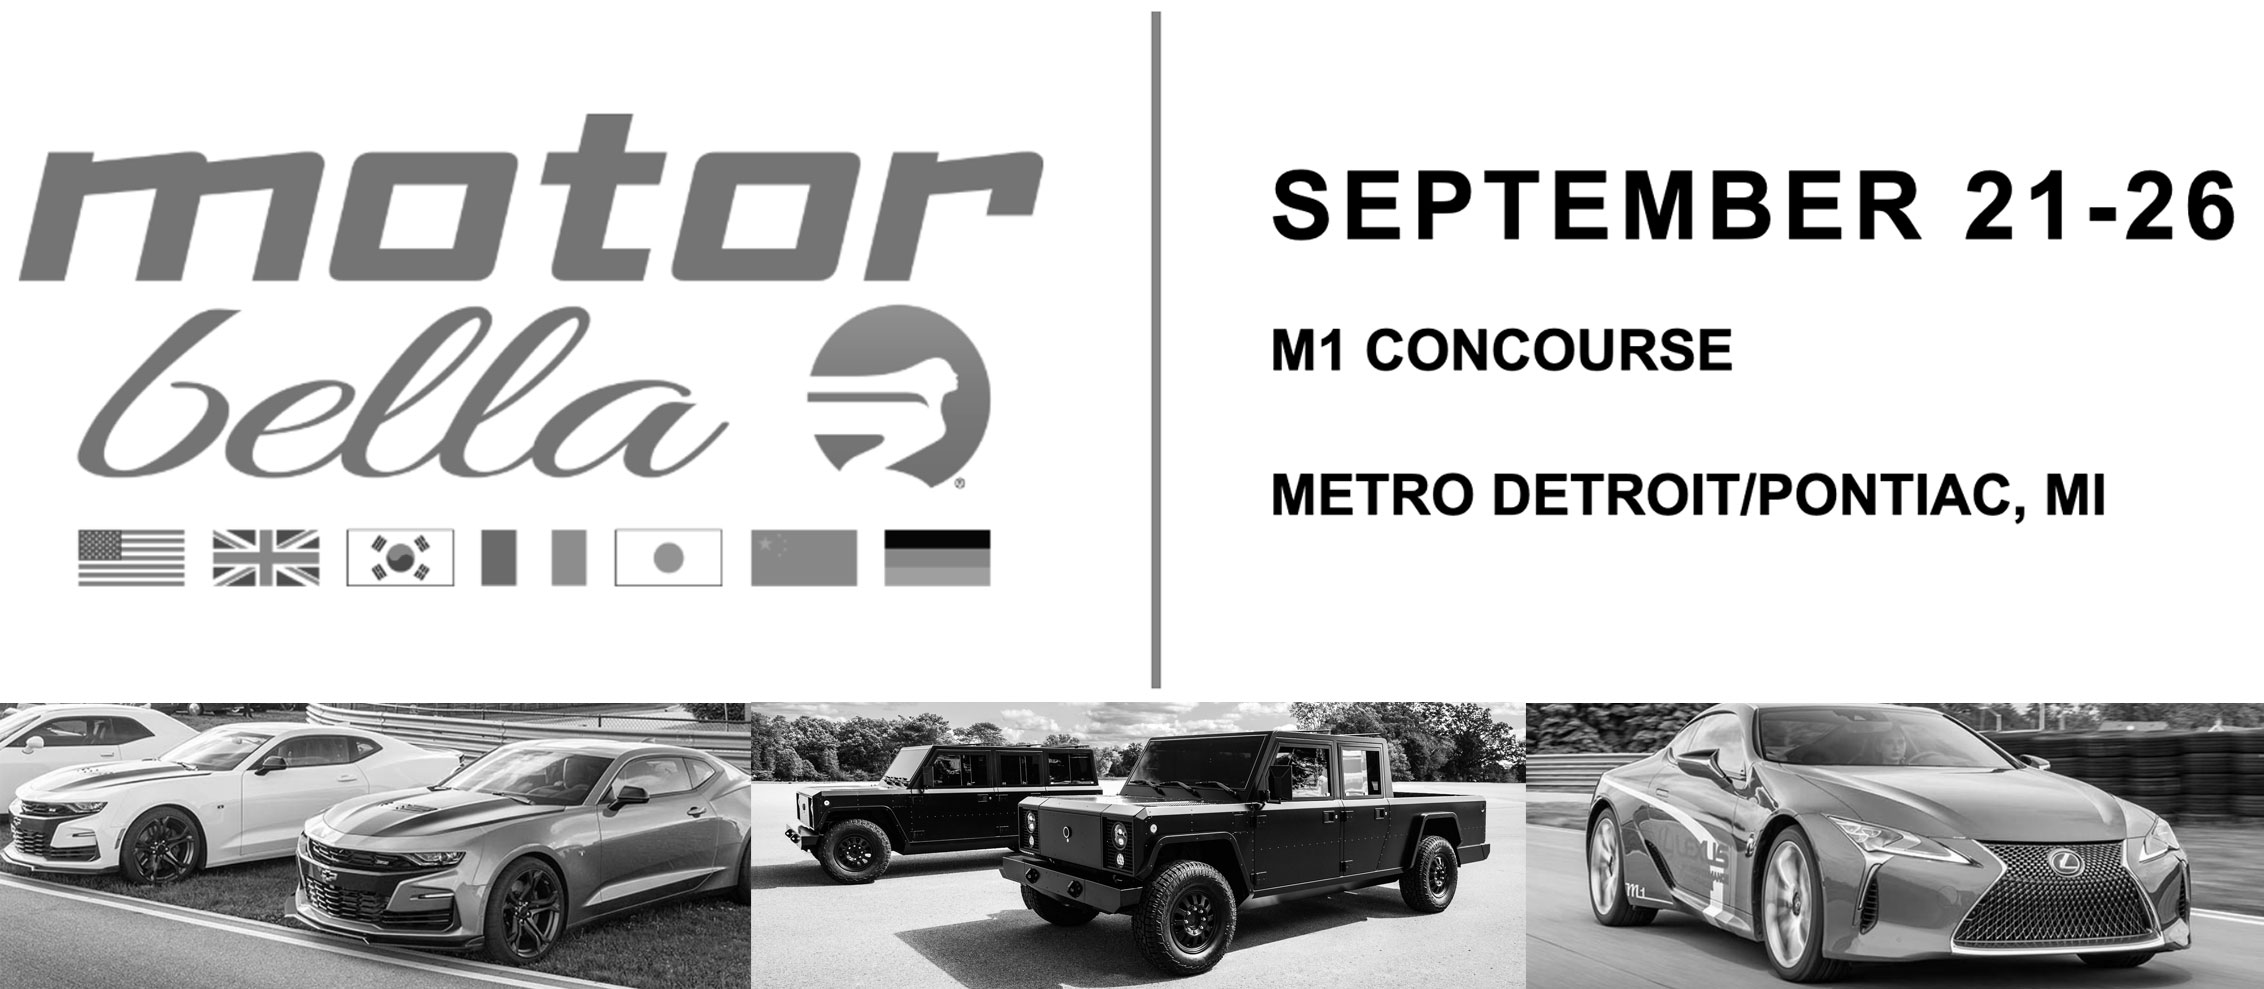 Announcement image for the Motor Bella event at the M1 Concourse September 21 through 26 in Pontiac Michigan